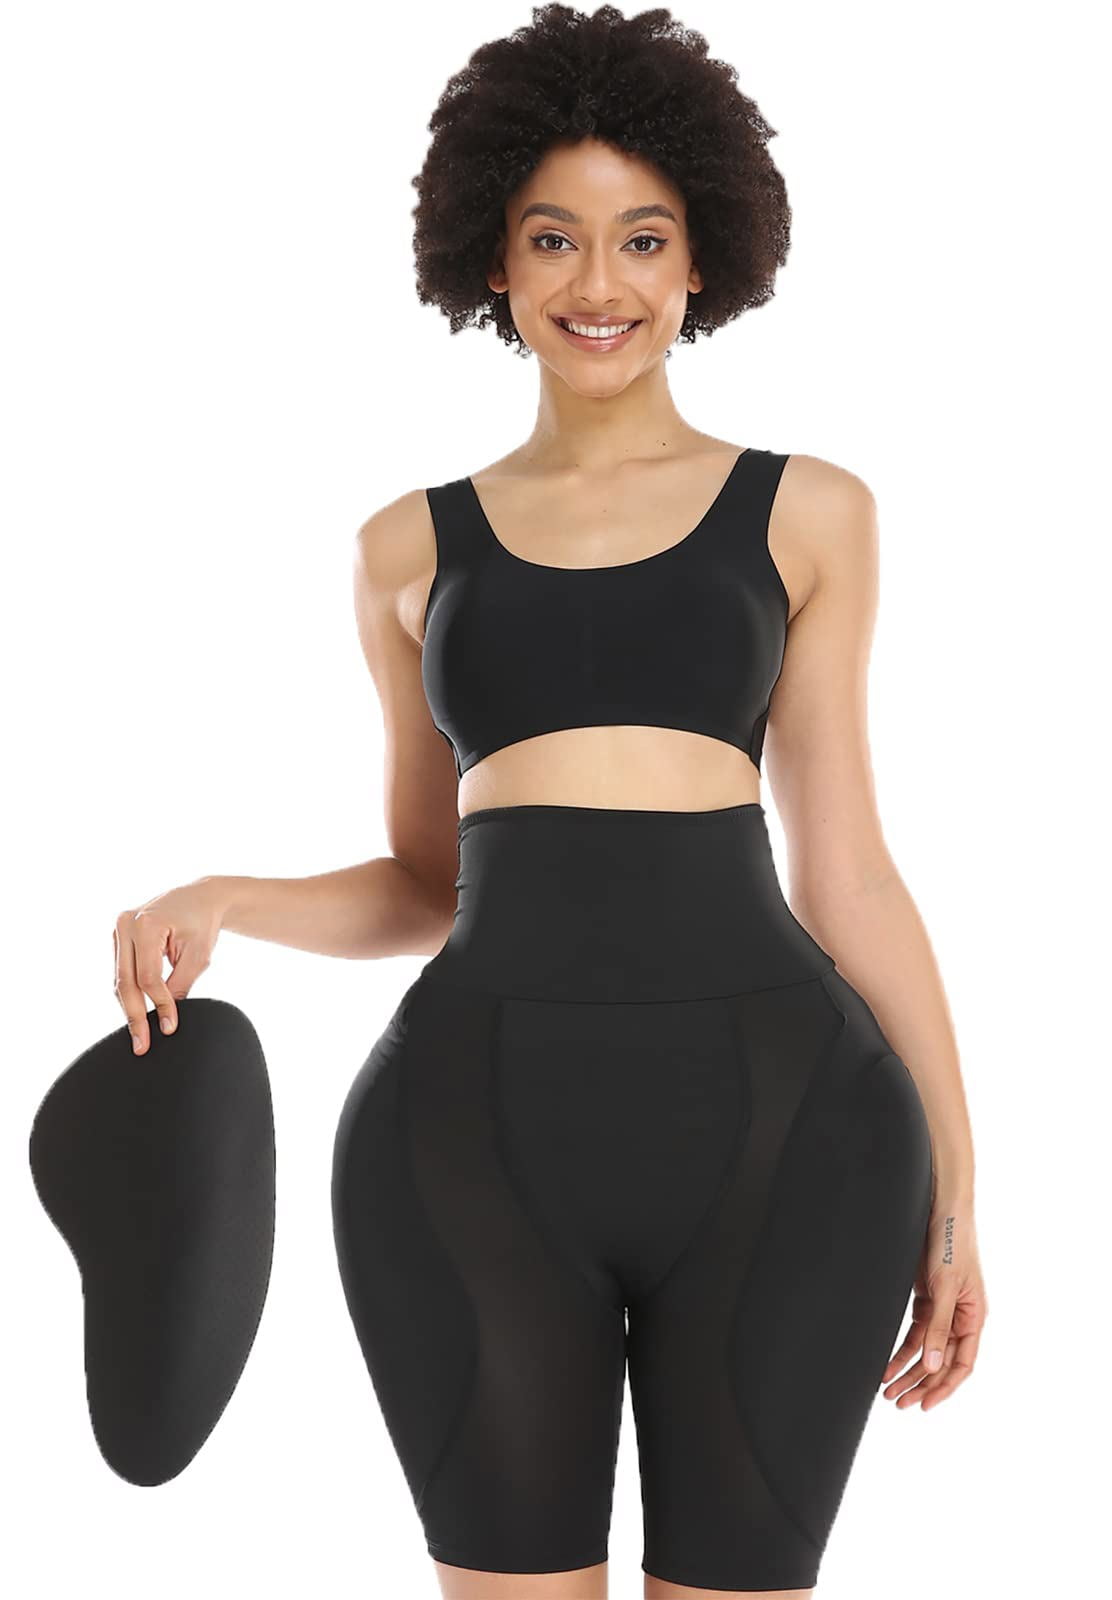 Sexy 2 Pad Sponge Hip Enhancer And Butt Lifter Hip Shaper Underwear For Women  Slimming Waist Trainer With Control Briefs Available In 5XL And 6XL Sizes  L220802 From Sihuai10, $18.27